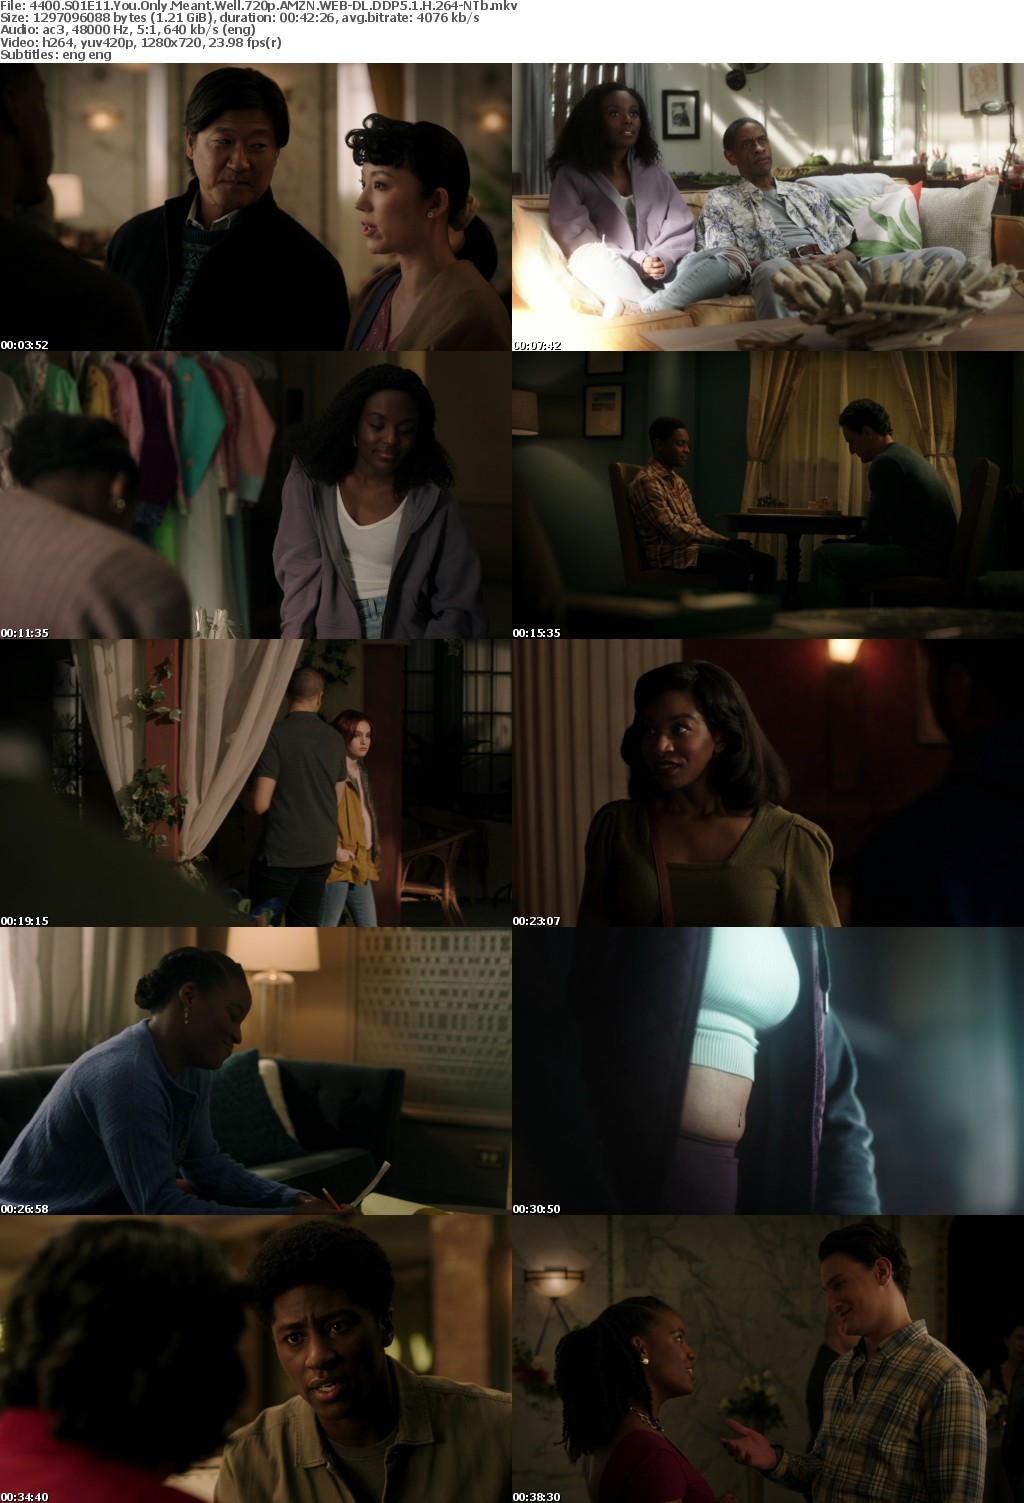 4400 S01E11 You Only Meant Well 720p AMZN WEBRip DDP5 1 x264-NTb